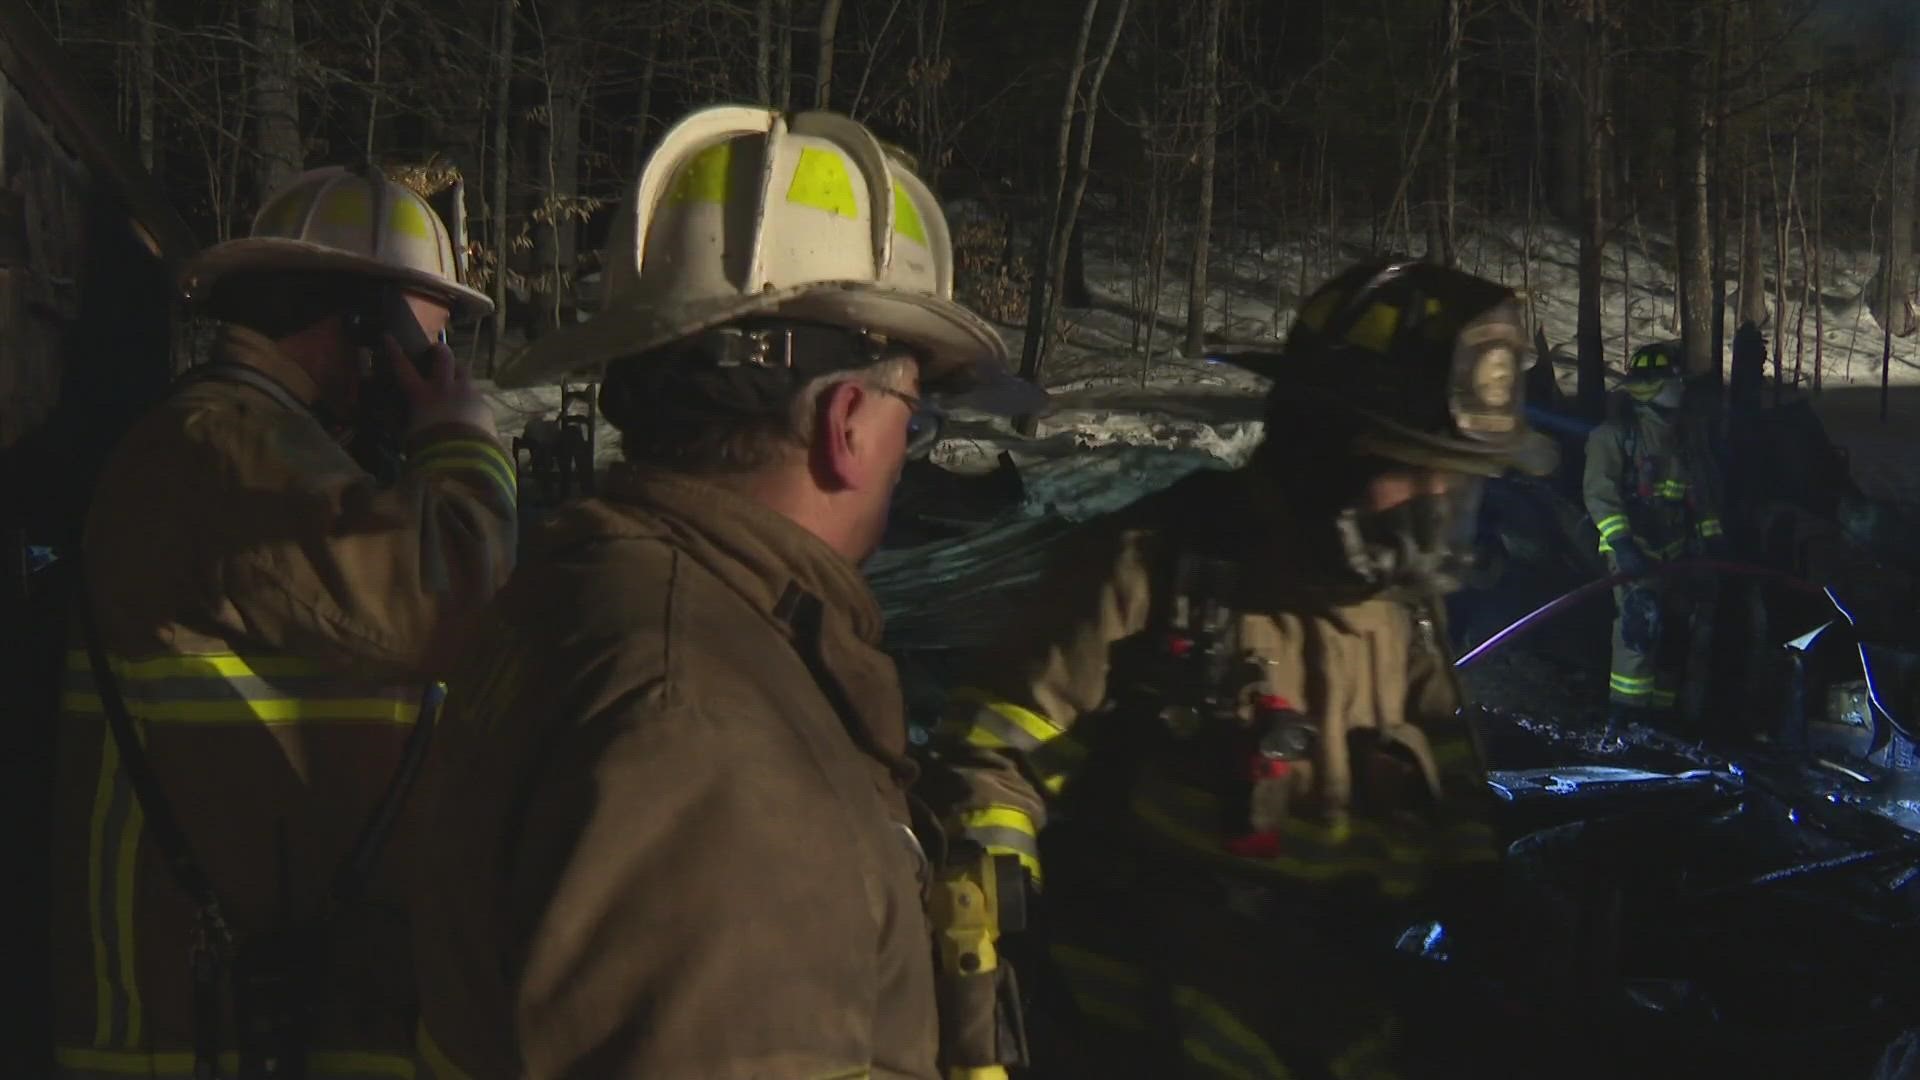 Firefighters and EMTs in Maine anticipate utilizing additional crews to allow personnel to rotate and keep warm.